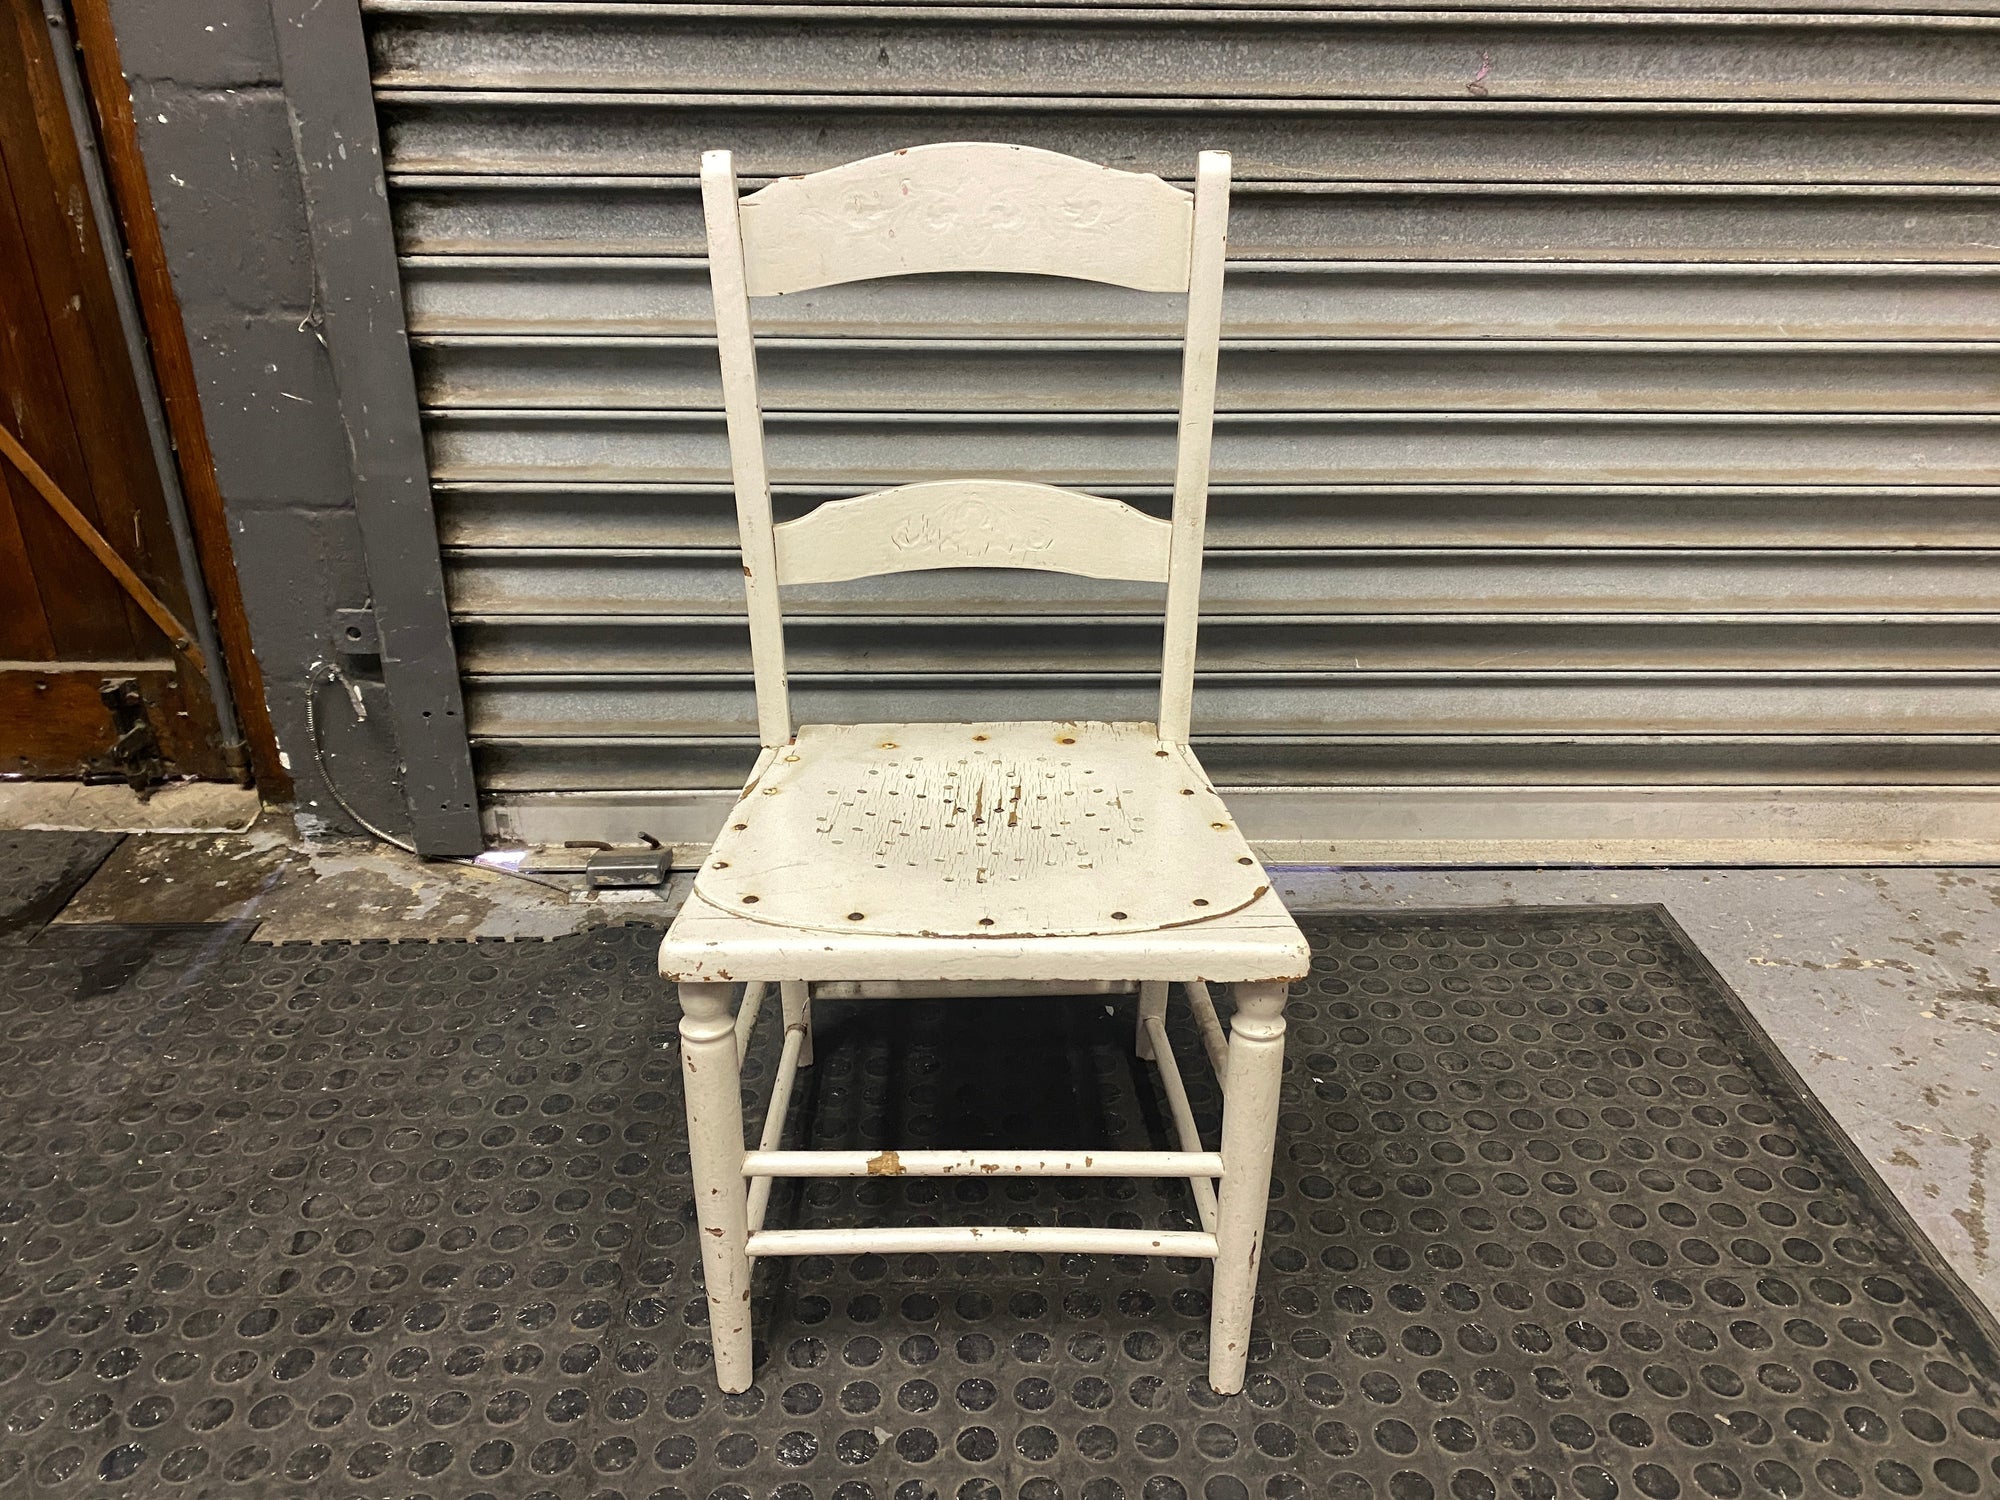 Wooden White Dining Chair - PRICE DROP - PRICE DROP